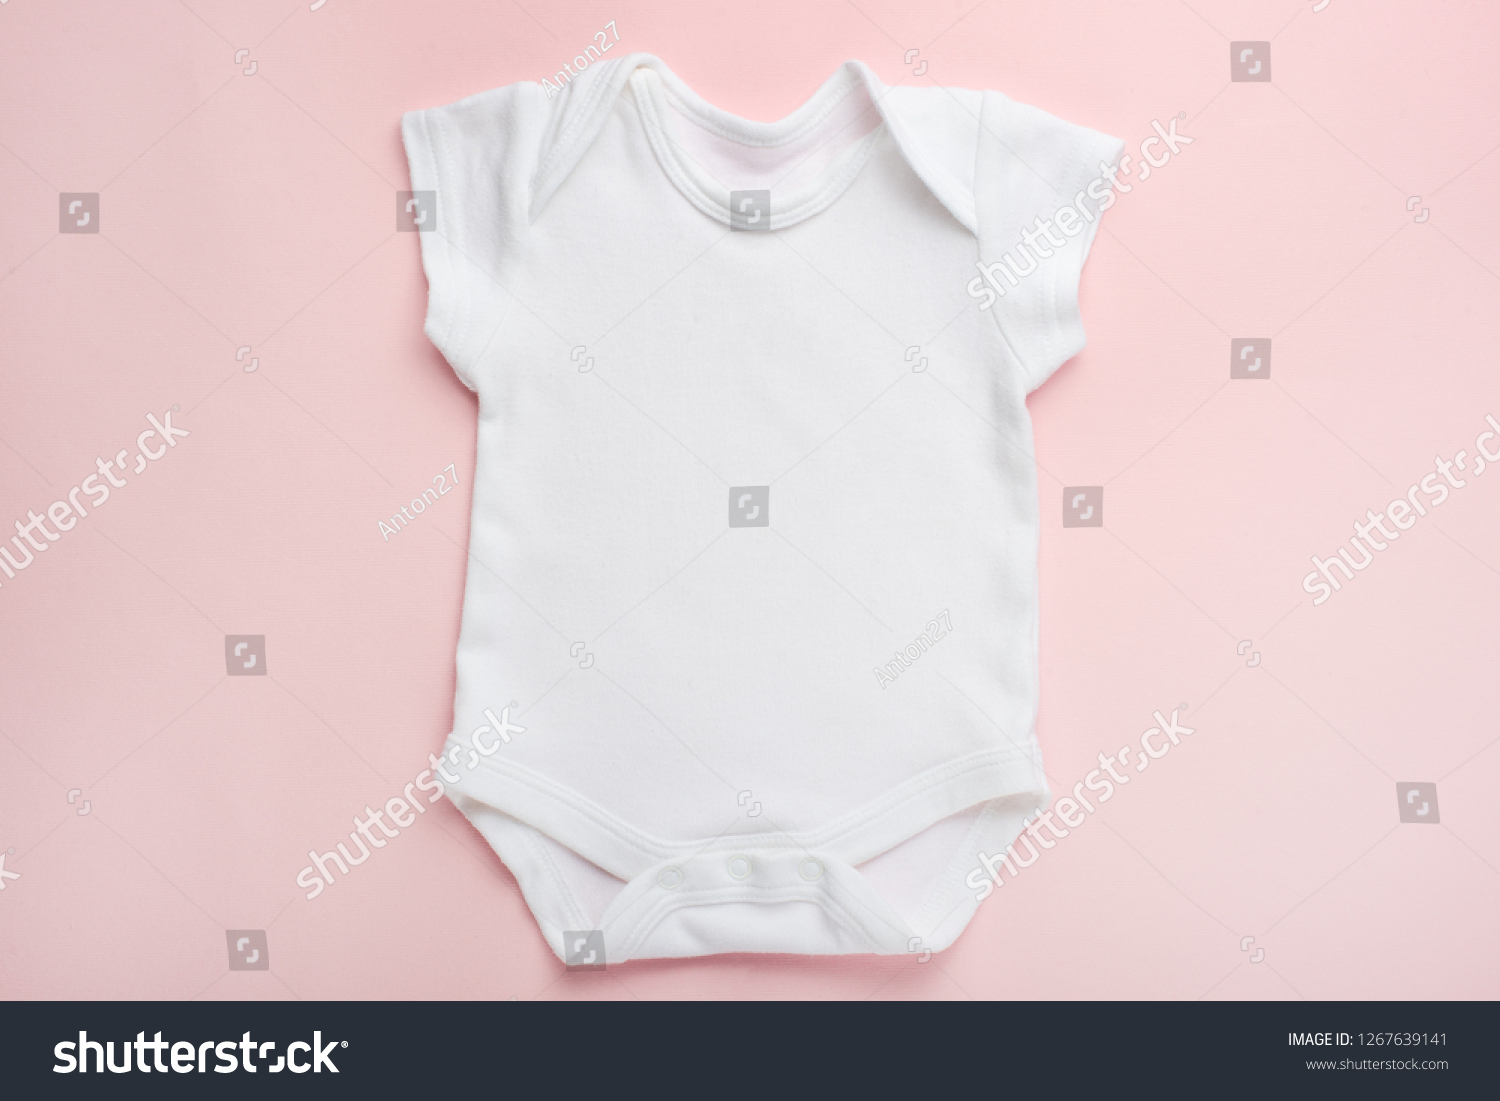 Layout Flat Lay white baby shirt bodysuit, on a pink background, for girls. Mock up for design and placement of logos, advertisements #1267639141